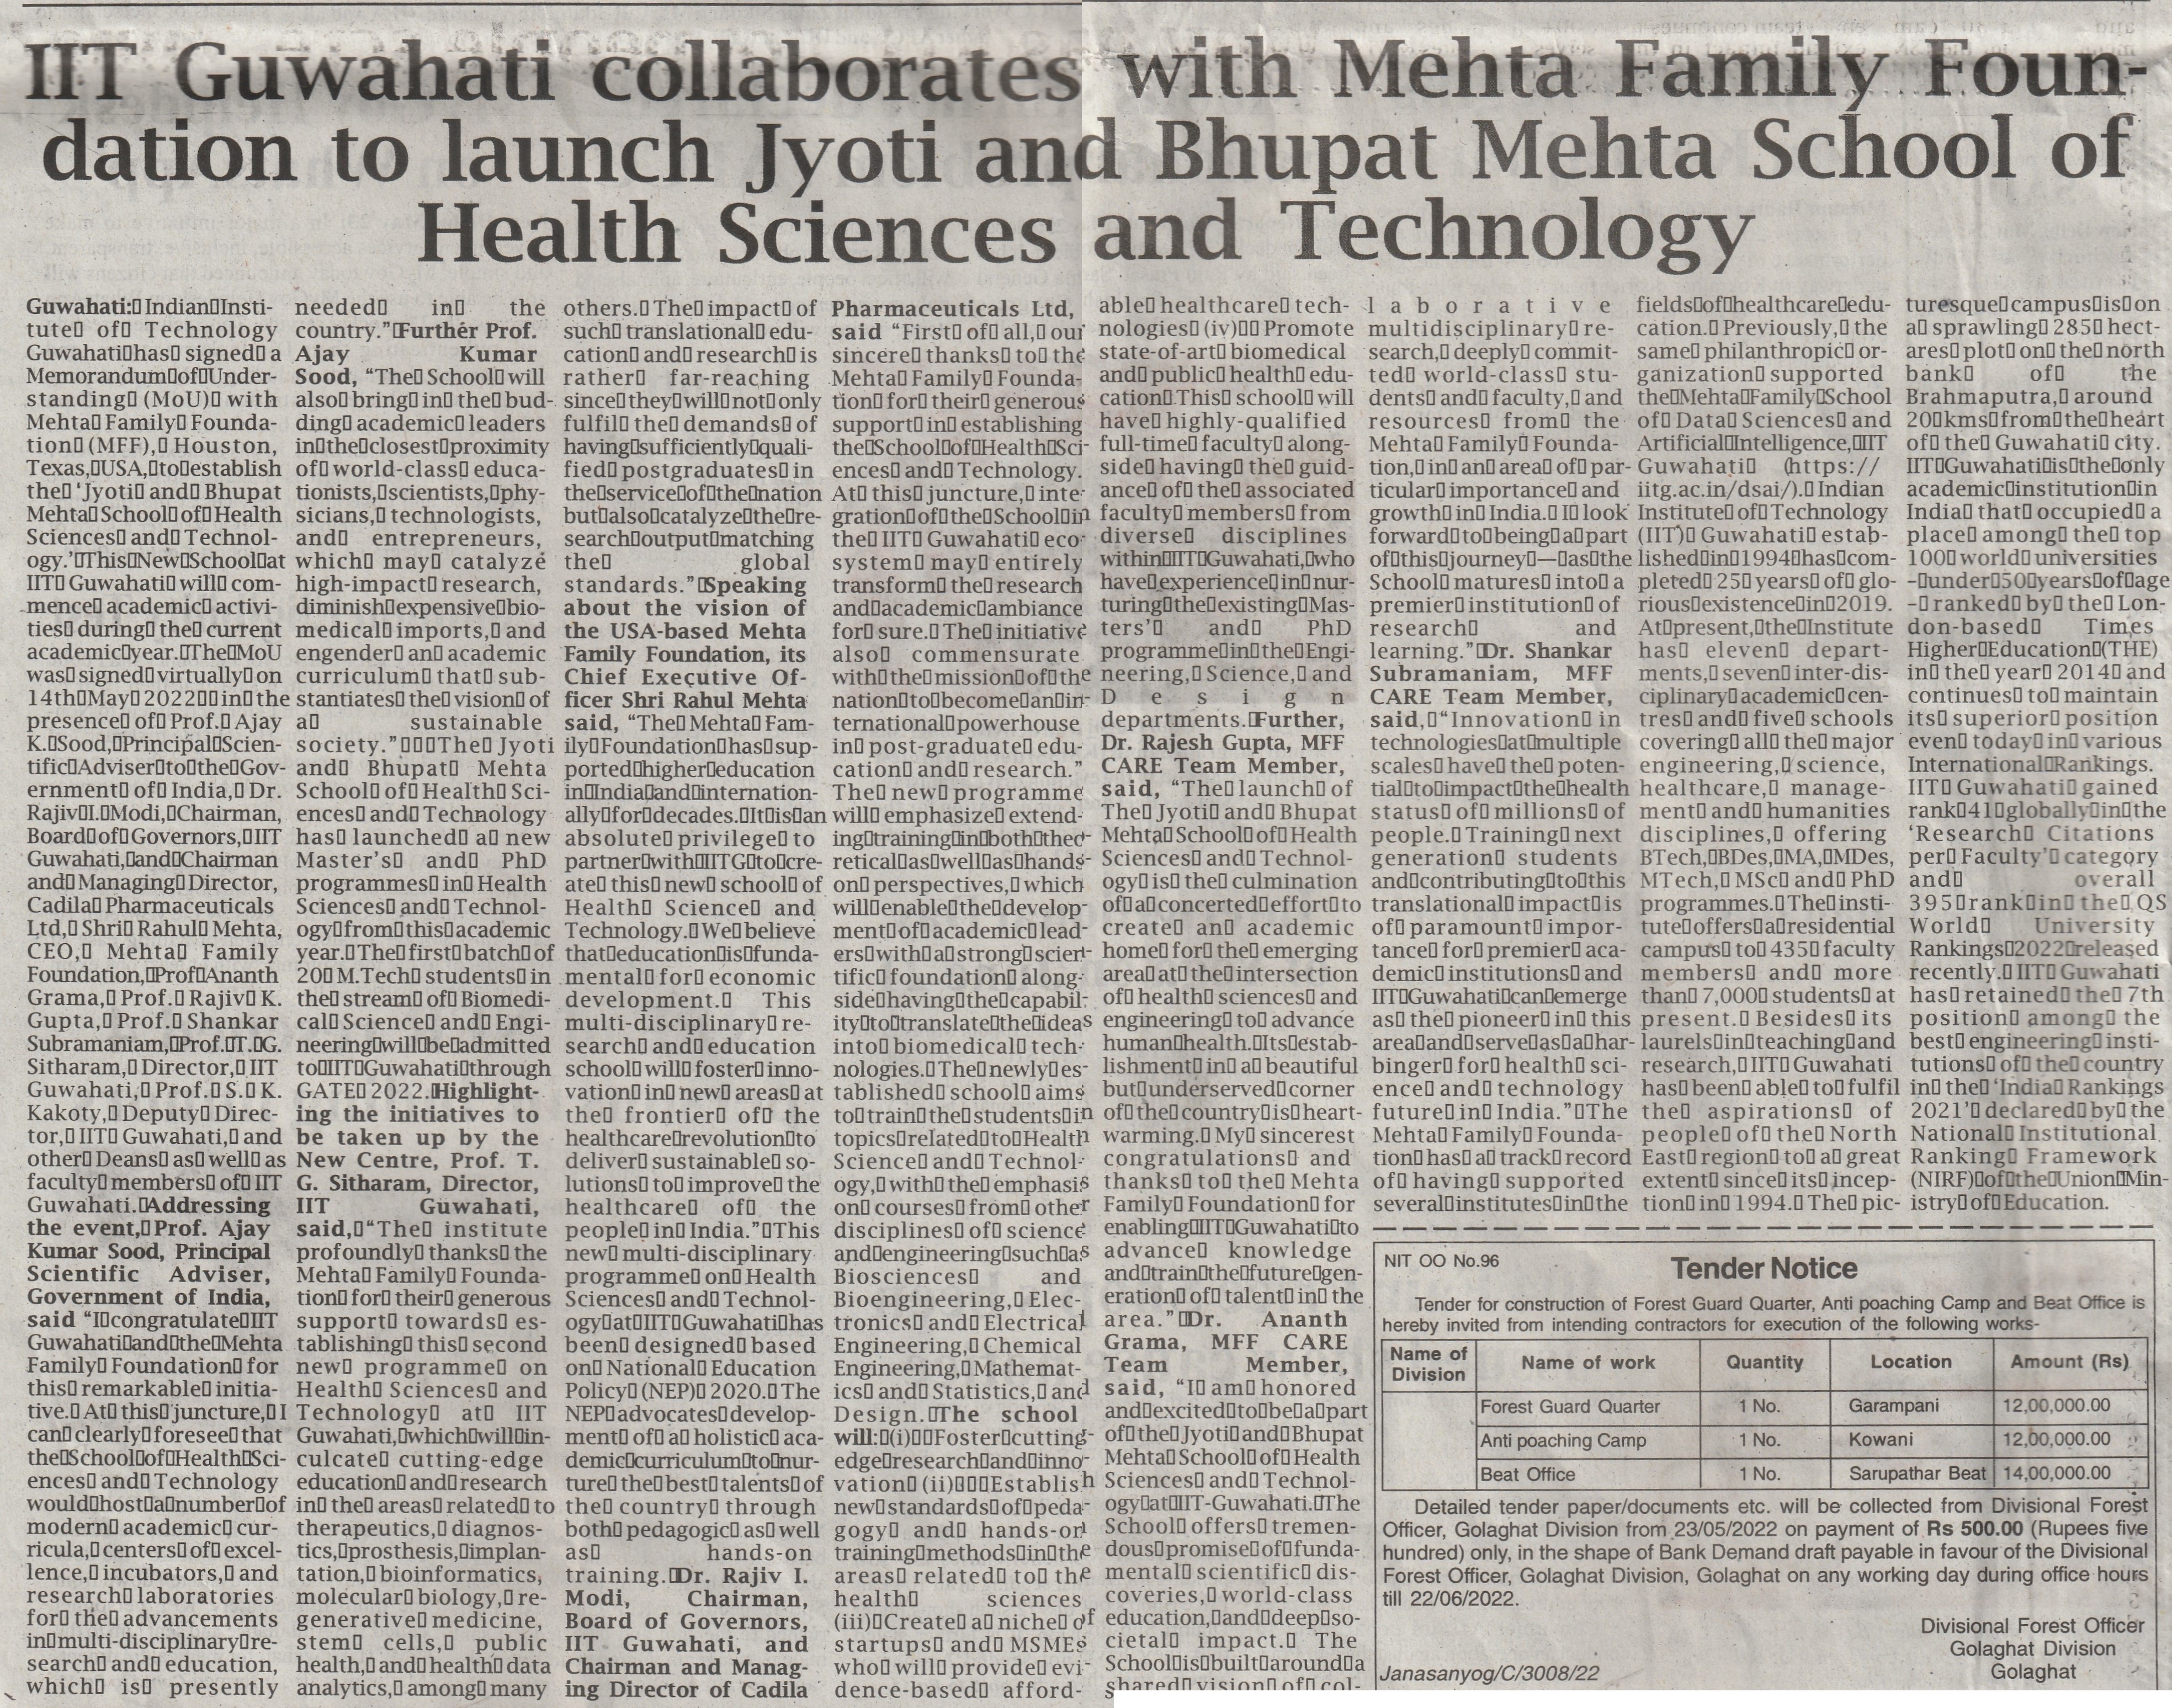 IIT Guwahati collaborates with Mehta Family Foundation to launch Jyoti and Bhupat Mehta School of Health Sciences and Technology